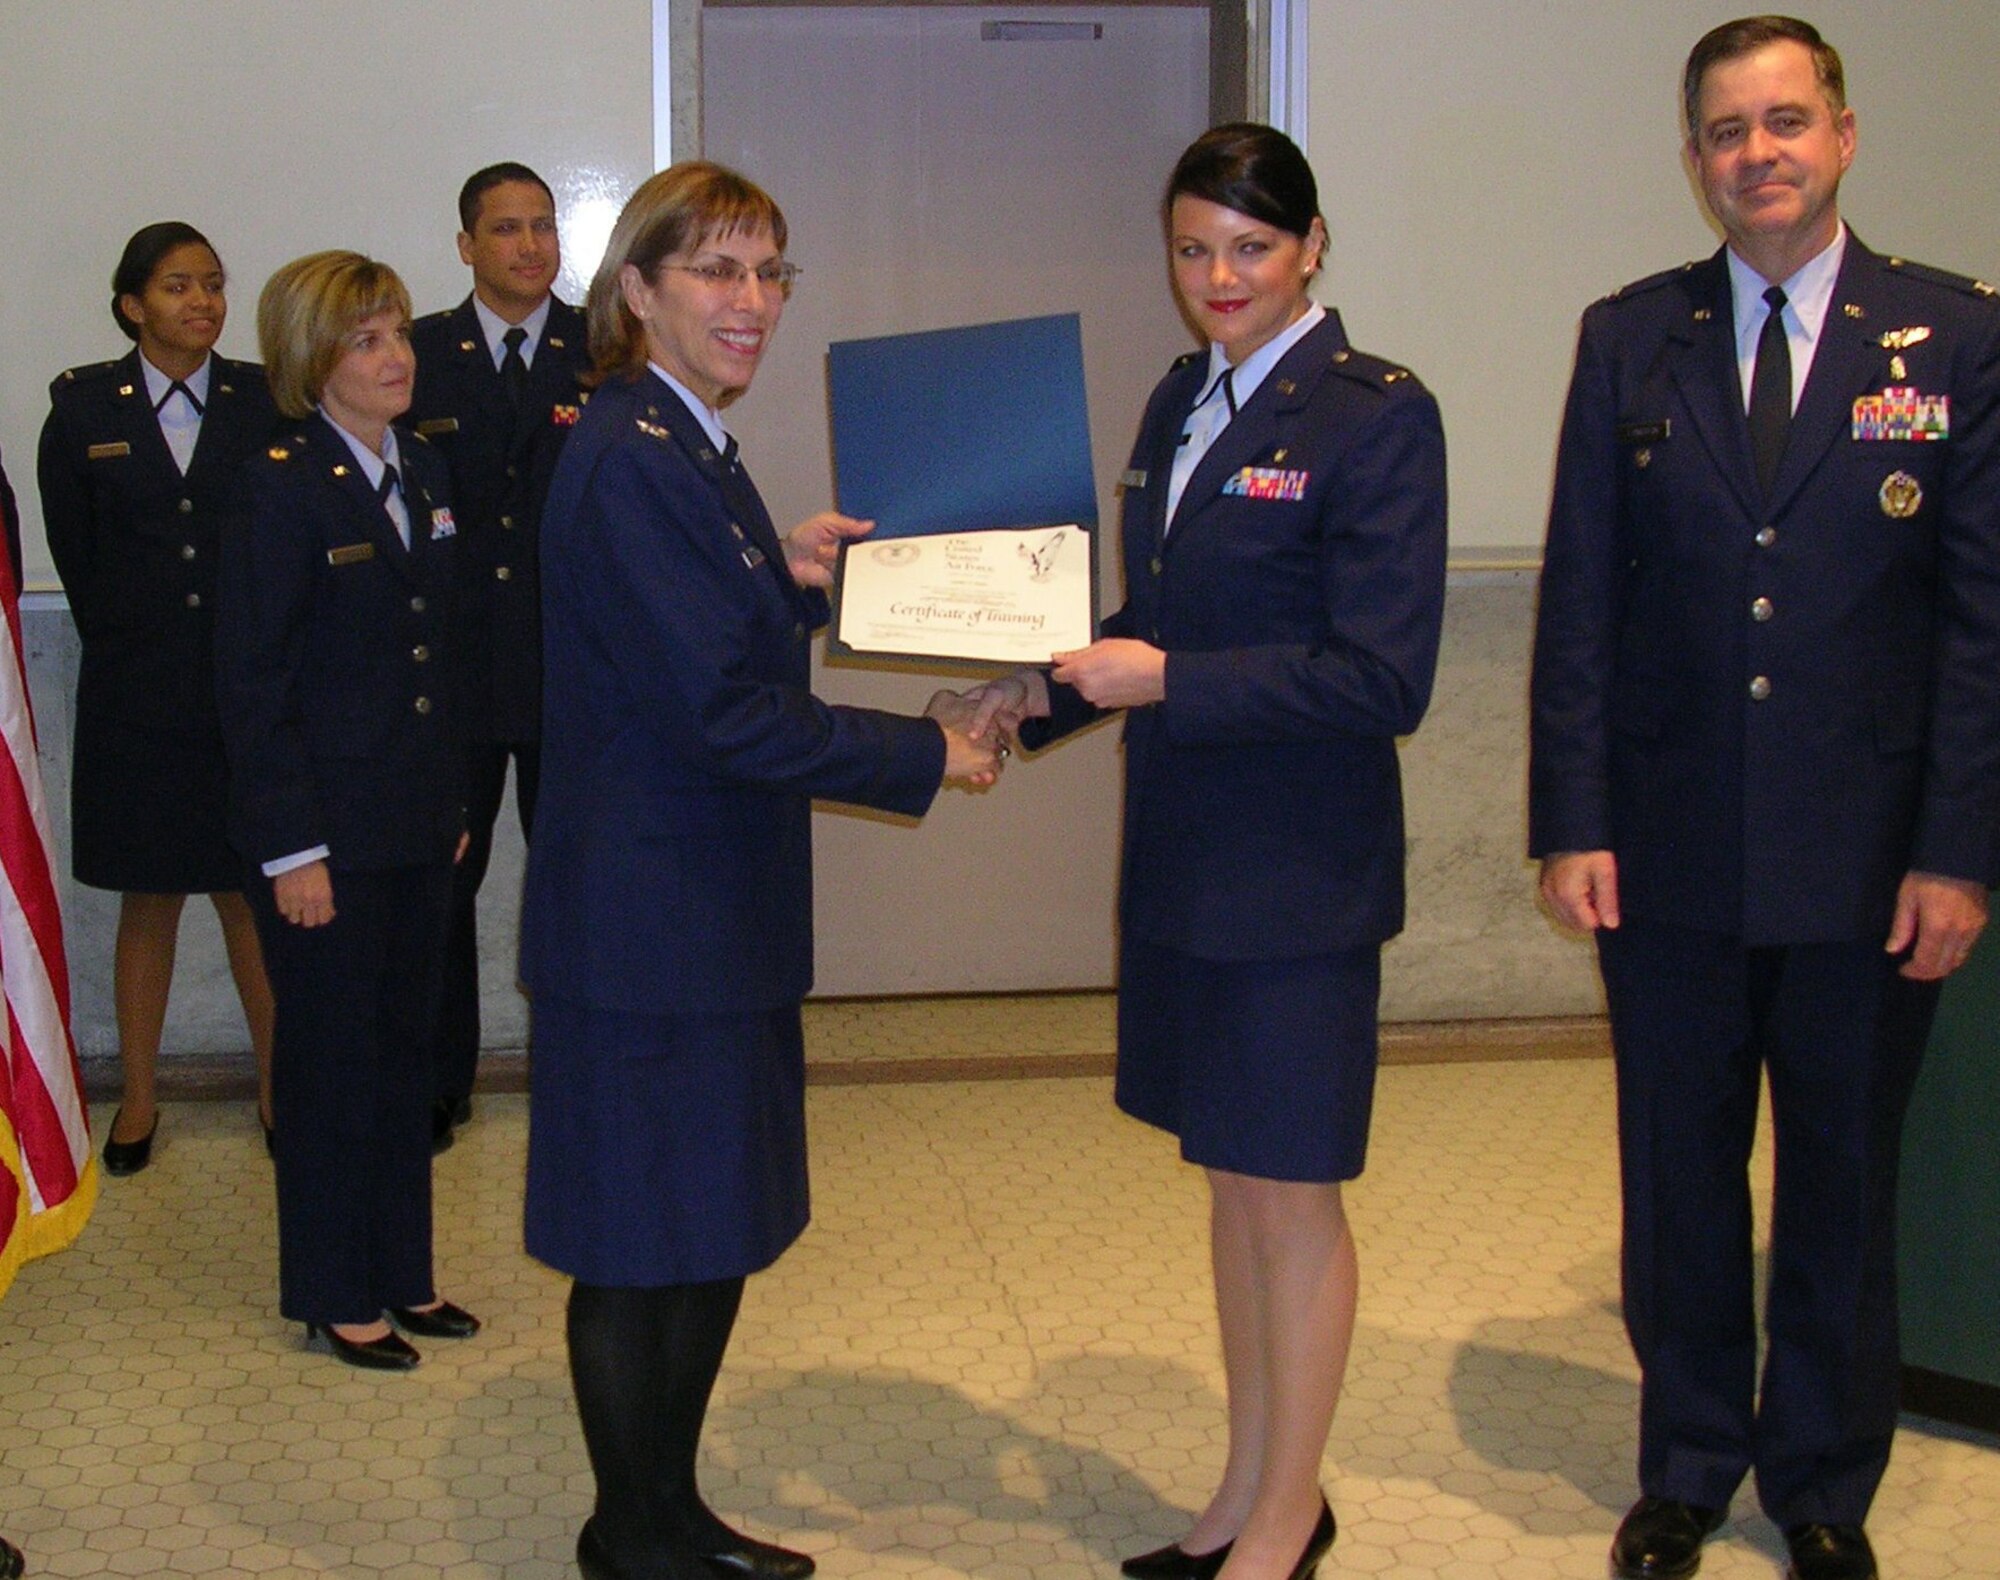 Col. Kimberly Slawinski, 88th Medical Group commander at Wright-Patterson Air Force Base, presents 2nd Lt. Candice Walter with her diploma for the Nurse Transition Program.  University Hospital Cincinnati and the Air Force have partnered to provide new registered nurses with the clinical skills and specialized training needed for deployment.  Assisting in the presentation are Col Thomas Langston, chief nurse at Wright-Patterson Medical Center (right) and Maj. Christine Berberick, chief of the Nurse Transition Program. (U.S. Air Force photo/Mike Frangipane) 